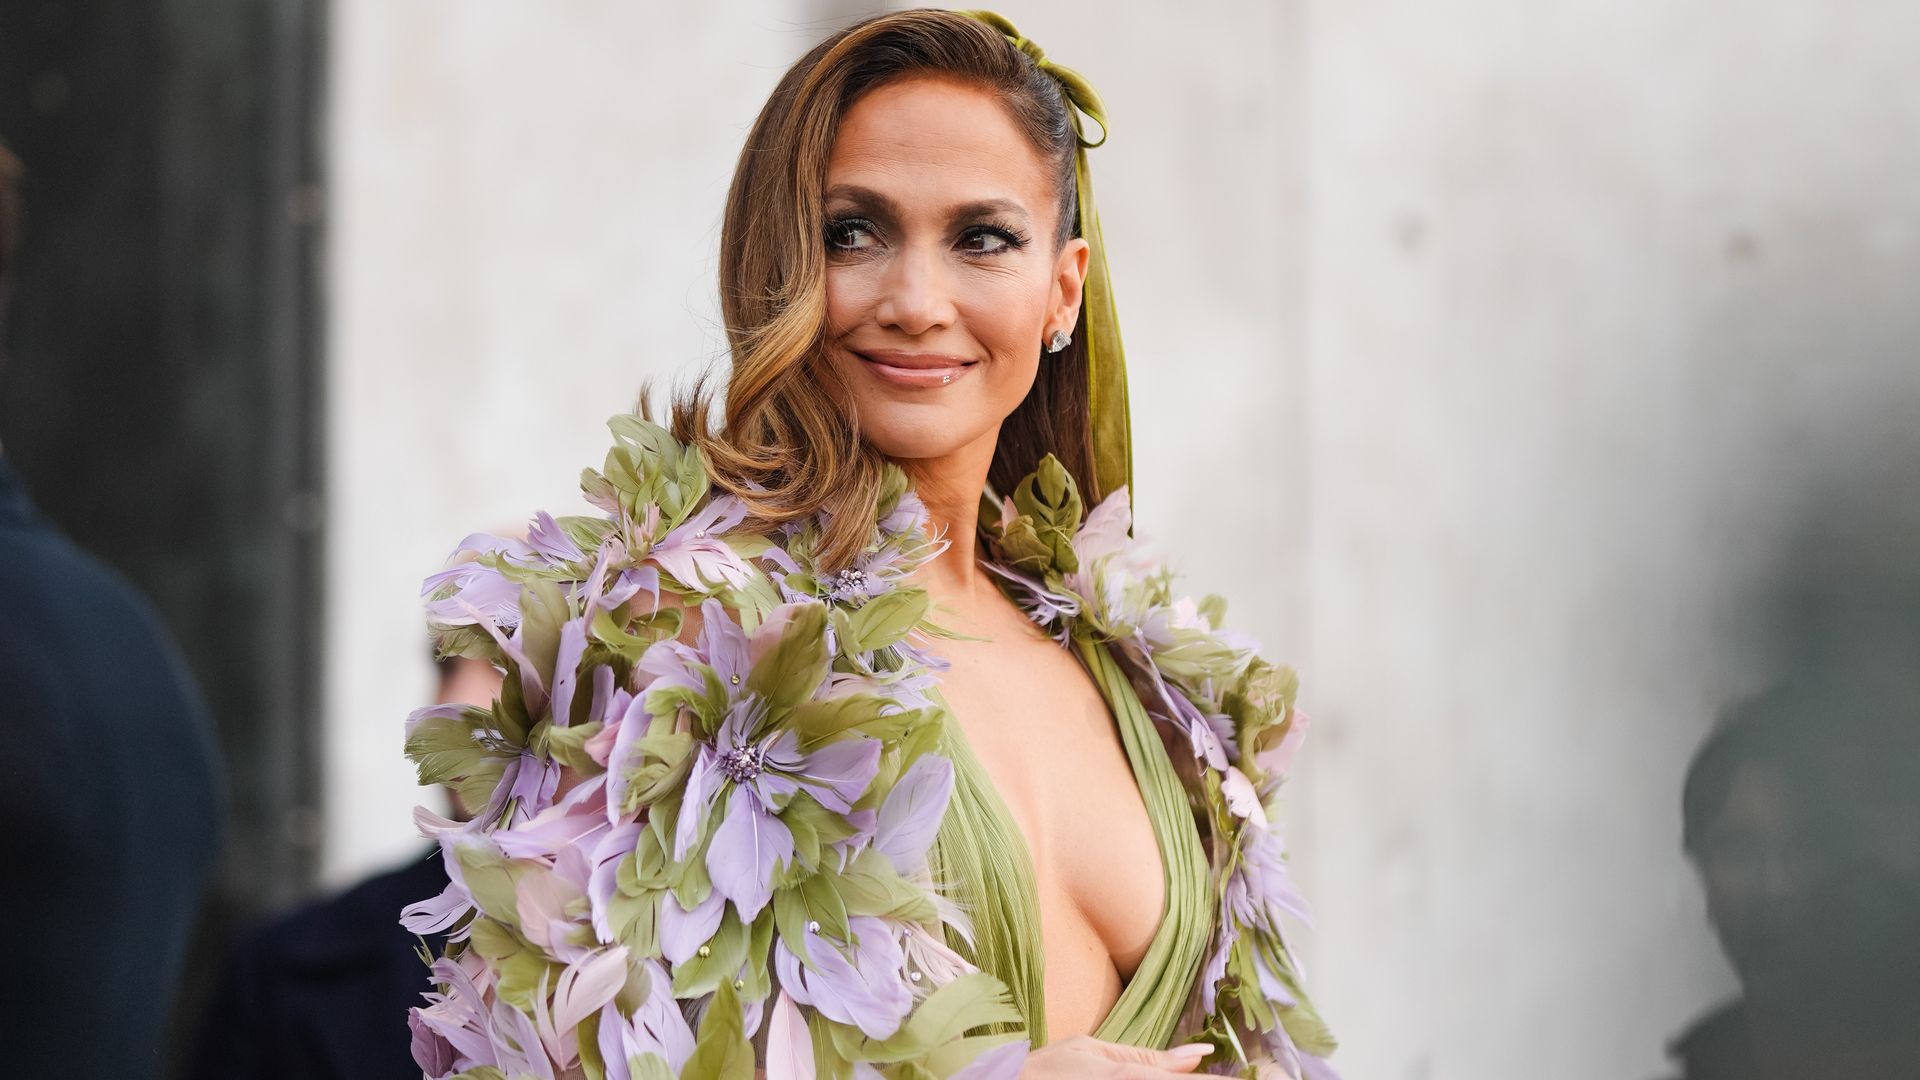 Jennifer Lopez steps out in floral ensemble and no wedding ring in New York City